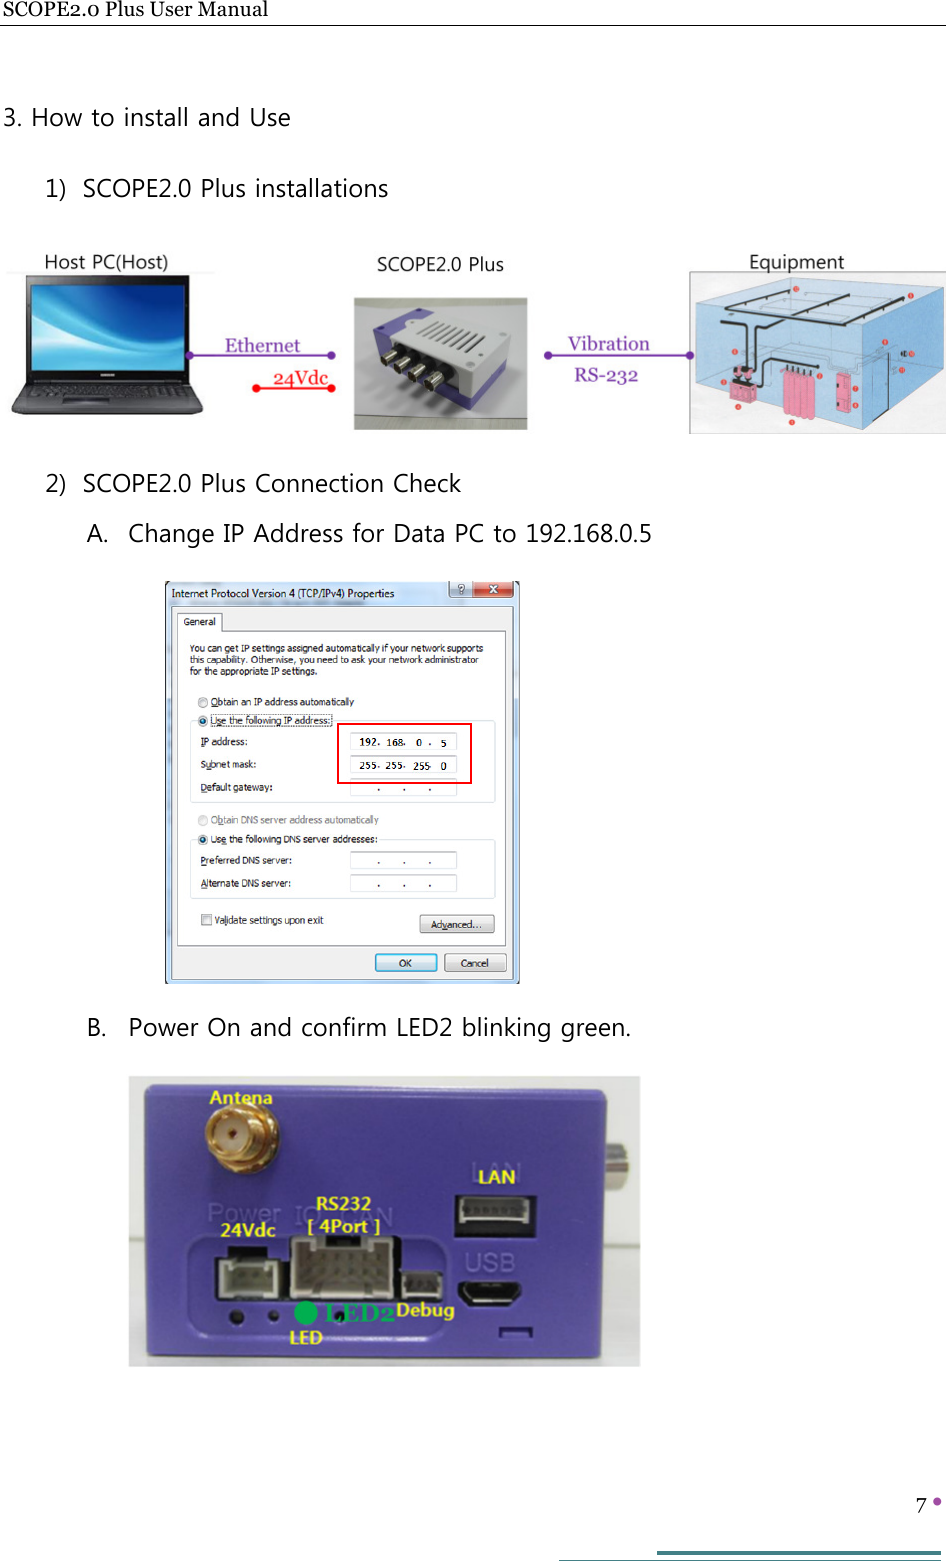 SCOPE2.0 Plus User Manual   7     3. How to install and Use 1) SCOPE2.0 Plus installations  2) SCOPE2.0 Plus Connection Check A. Change IP Address for Data PC to 192.168.0.5       B. Power On and confirm LED2 blinking green.      